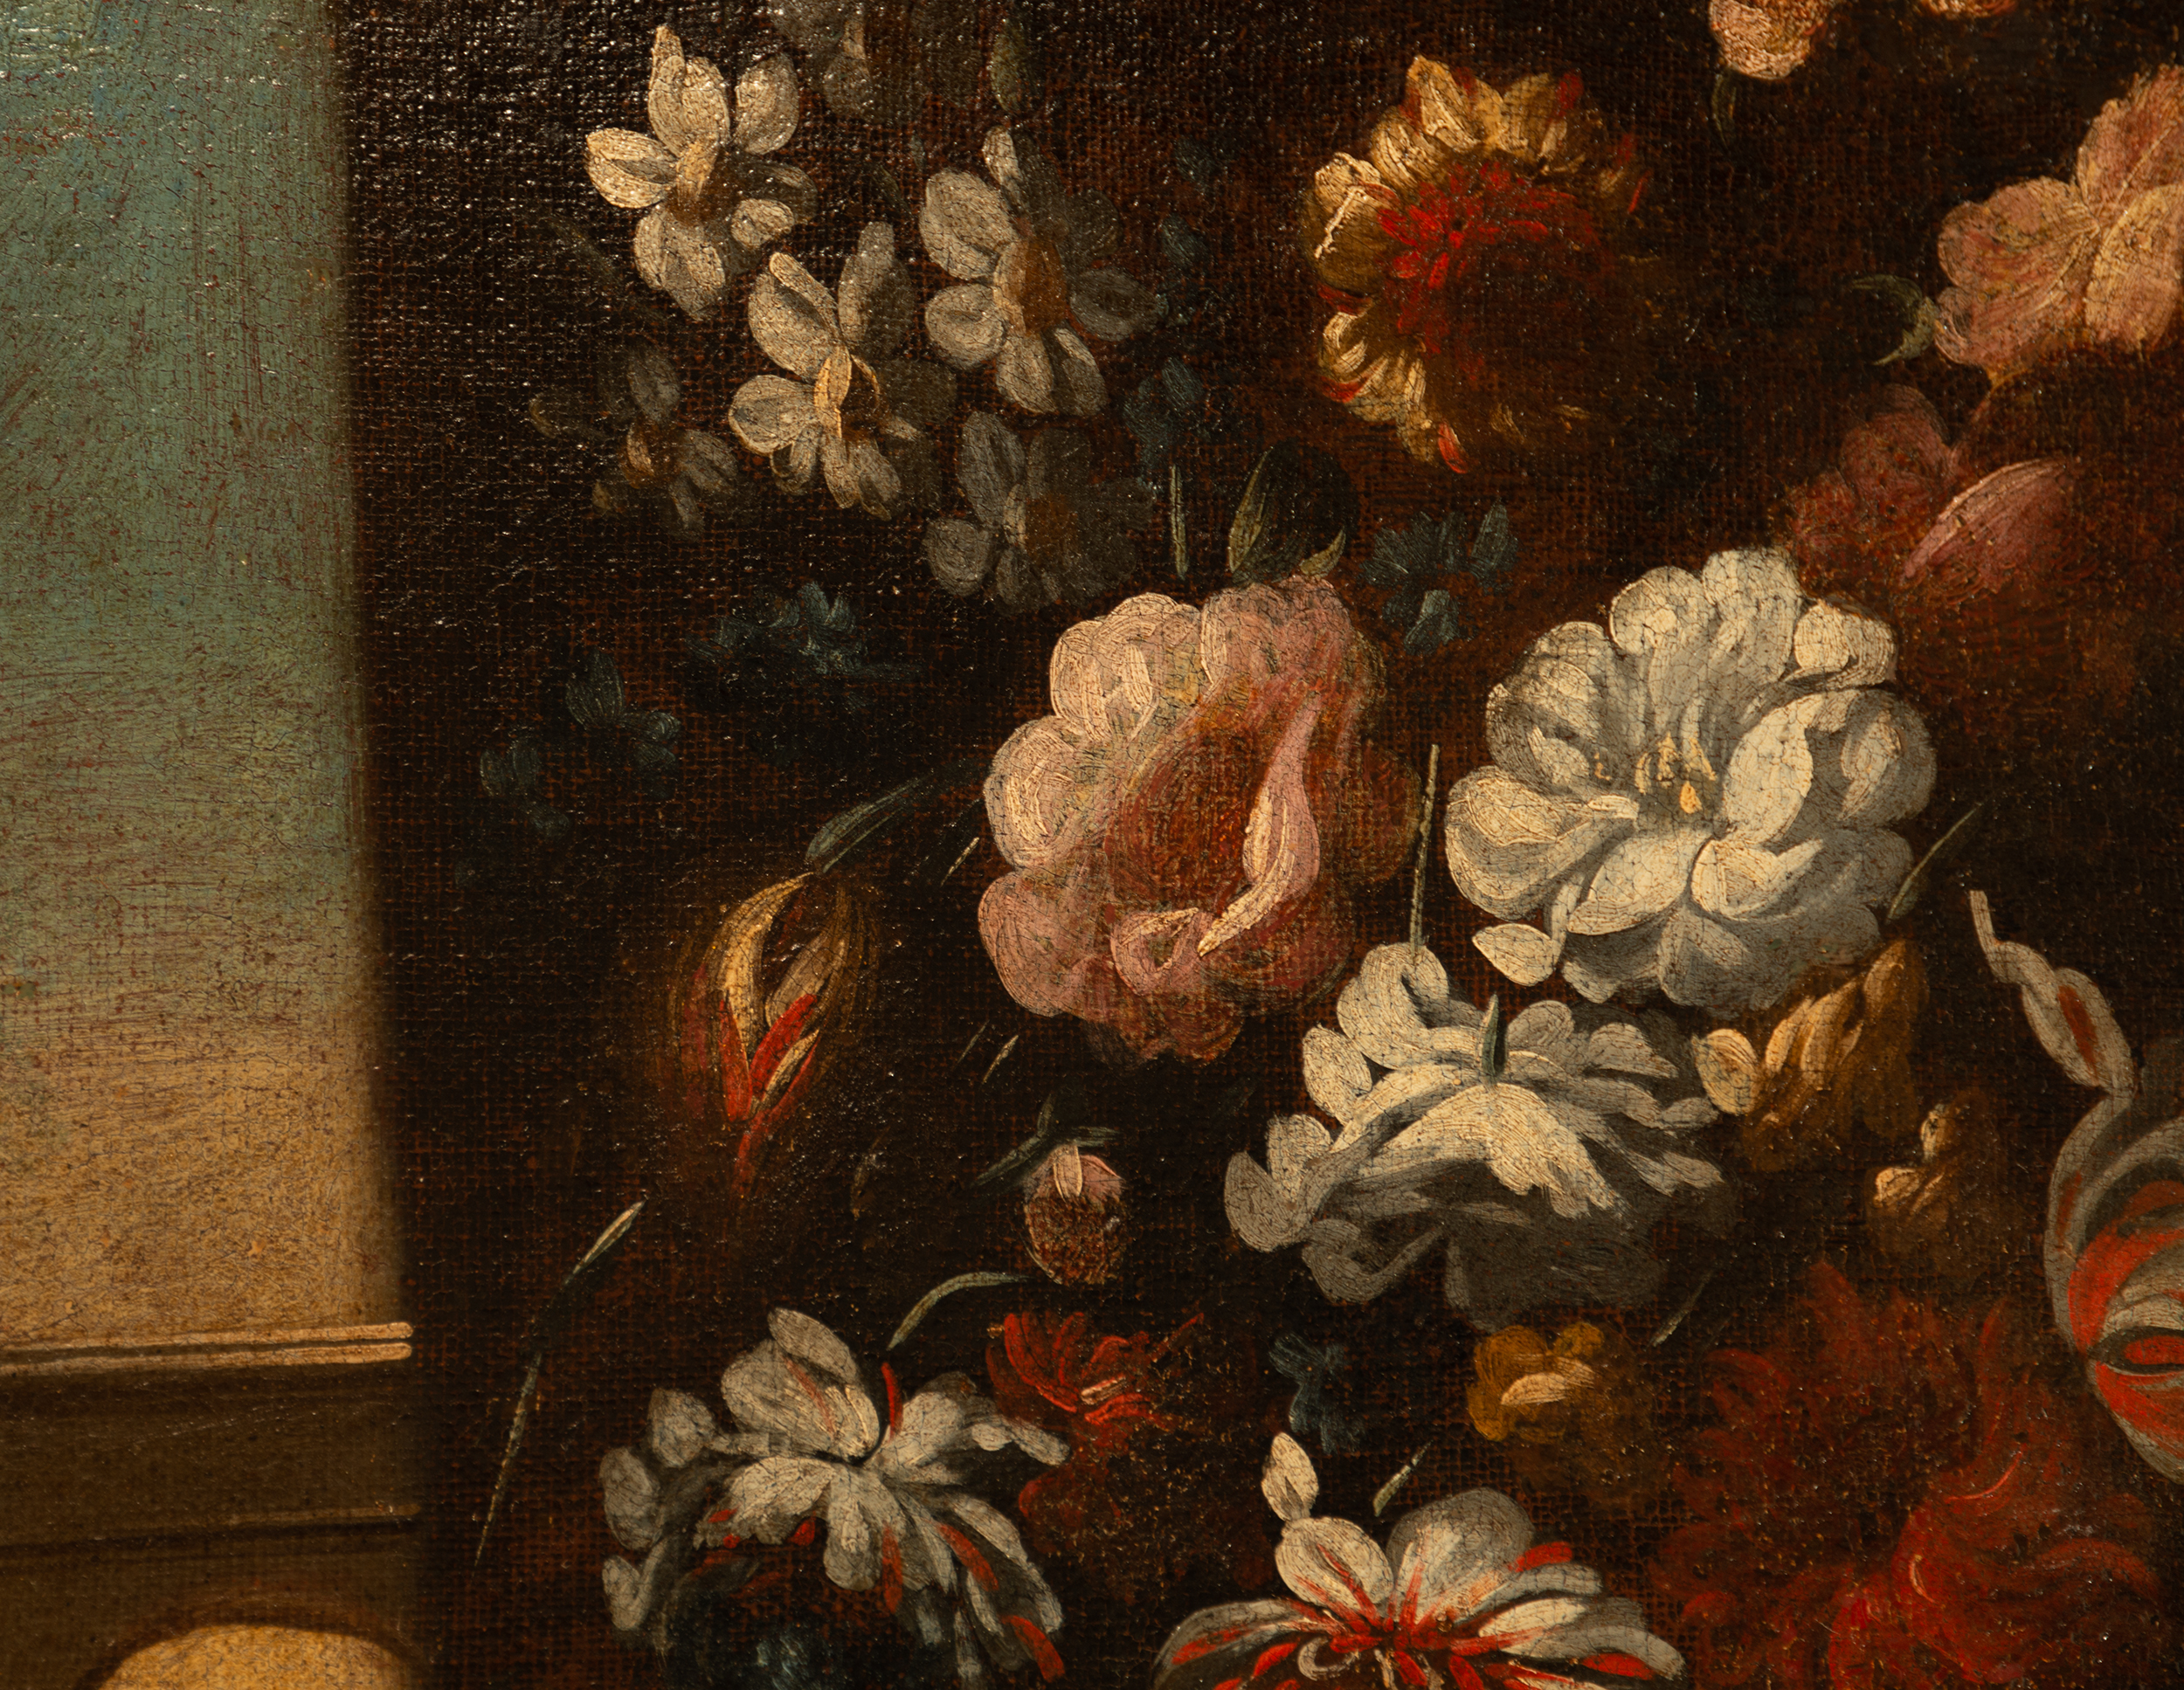 Still Life with Flowers and Watermelon, 17th century Majorcan school - Image 5 of 7